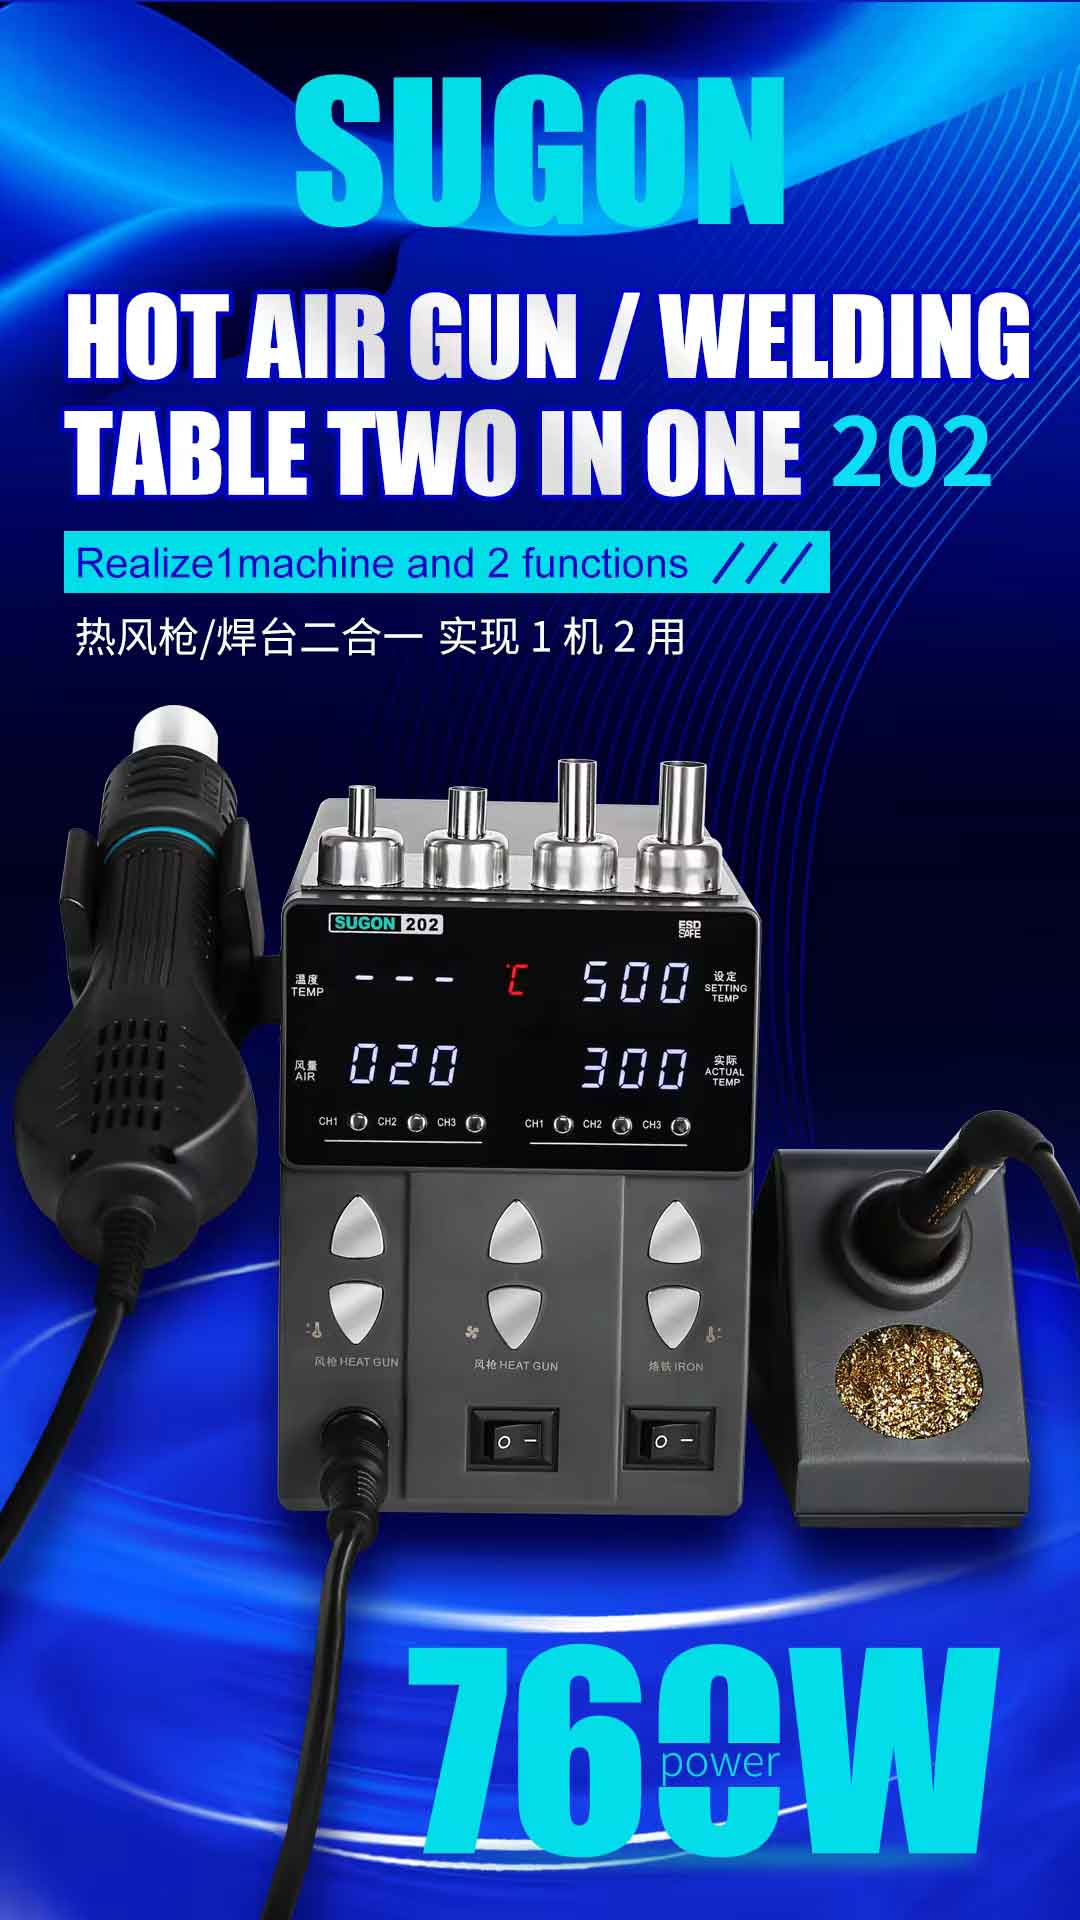 Sugon 202 2in1 Soldering Iron & Hot Air Gun Rework Station Electric For PCB - IC/SMD/BGA